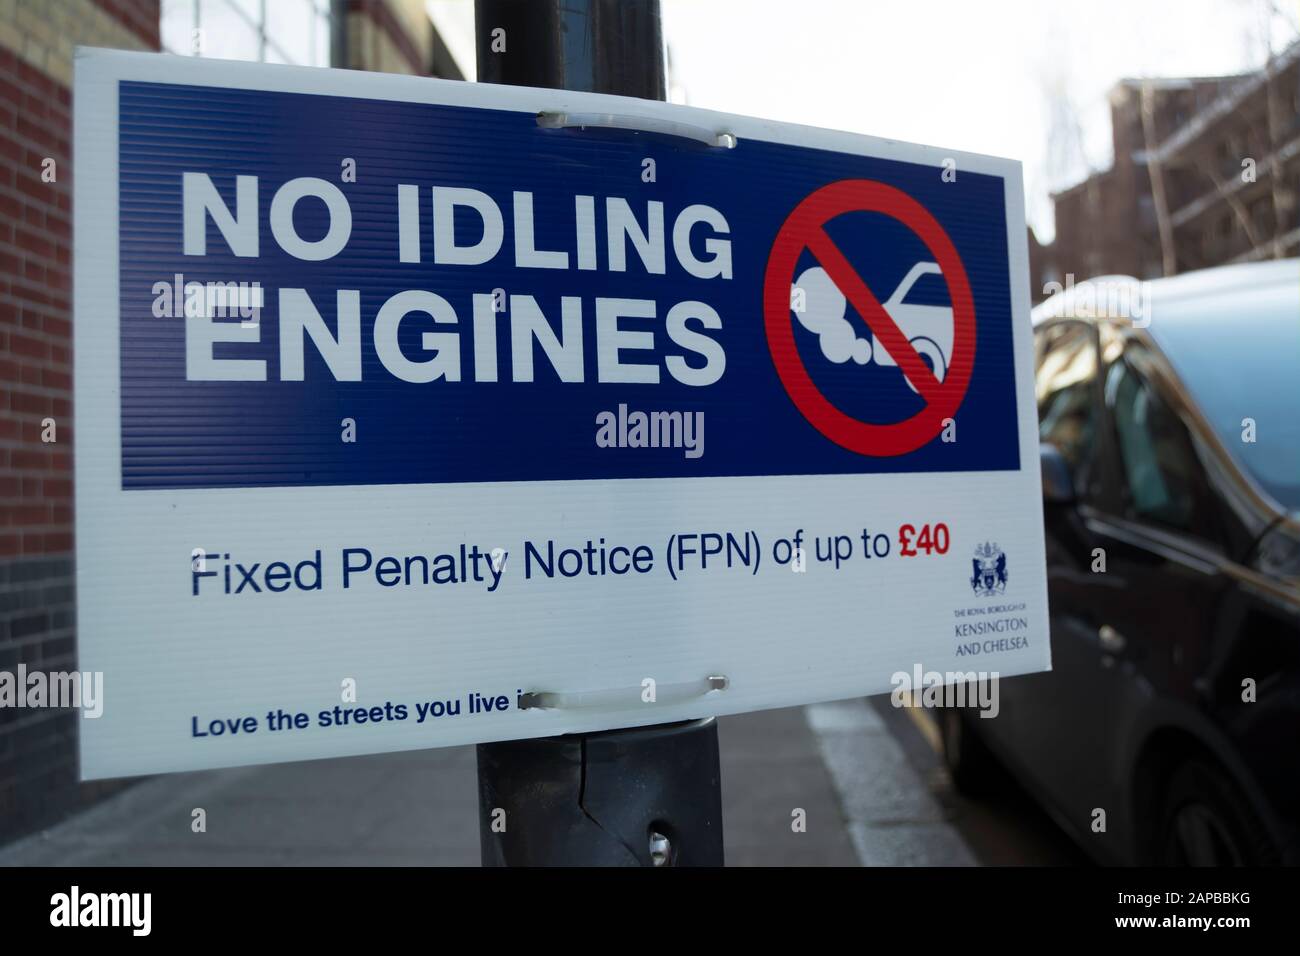 no idling engines sign warning of a £40 fine, in the royal borough of kensington and chelsea, london, england Stock Photo